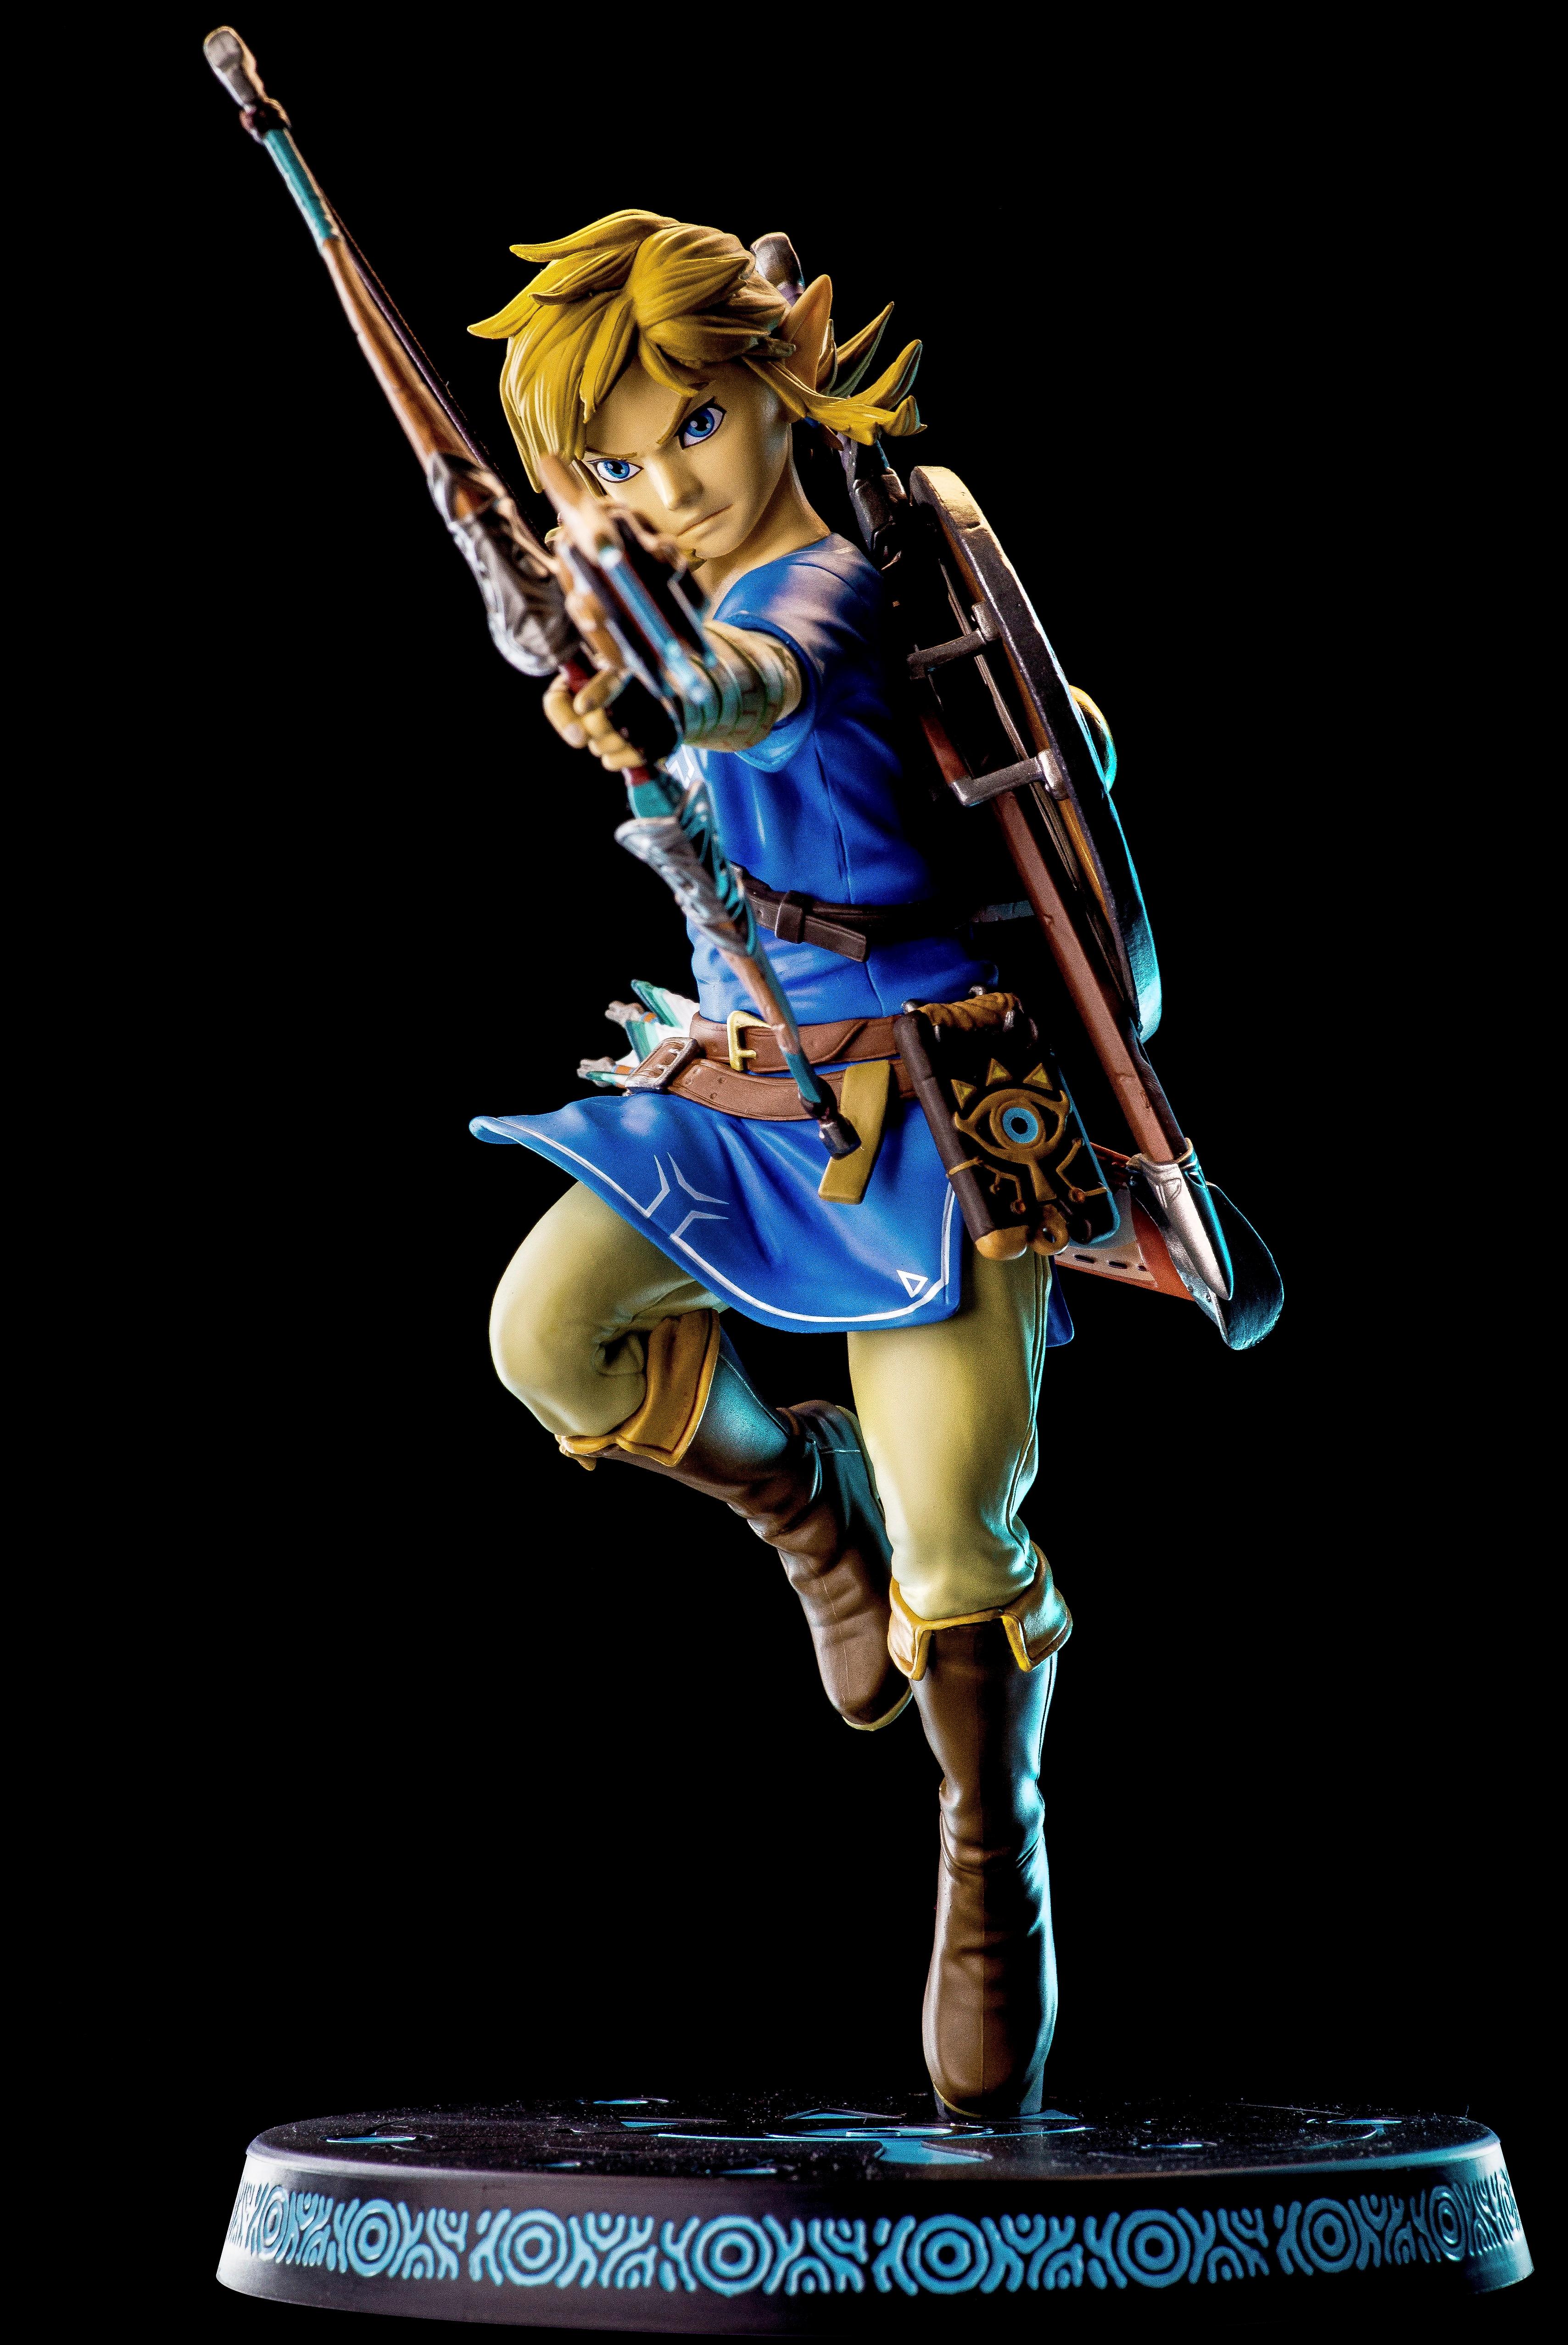 First 4 Figures The Legend of Zelda: Breath of the Wild Link PVC Statue  Collector's Edition 3009-158 - Best Buy